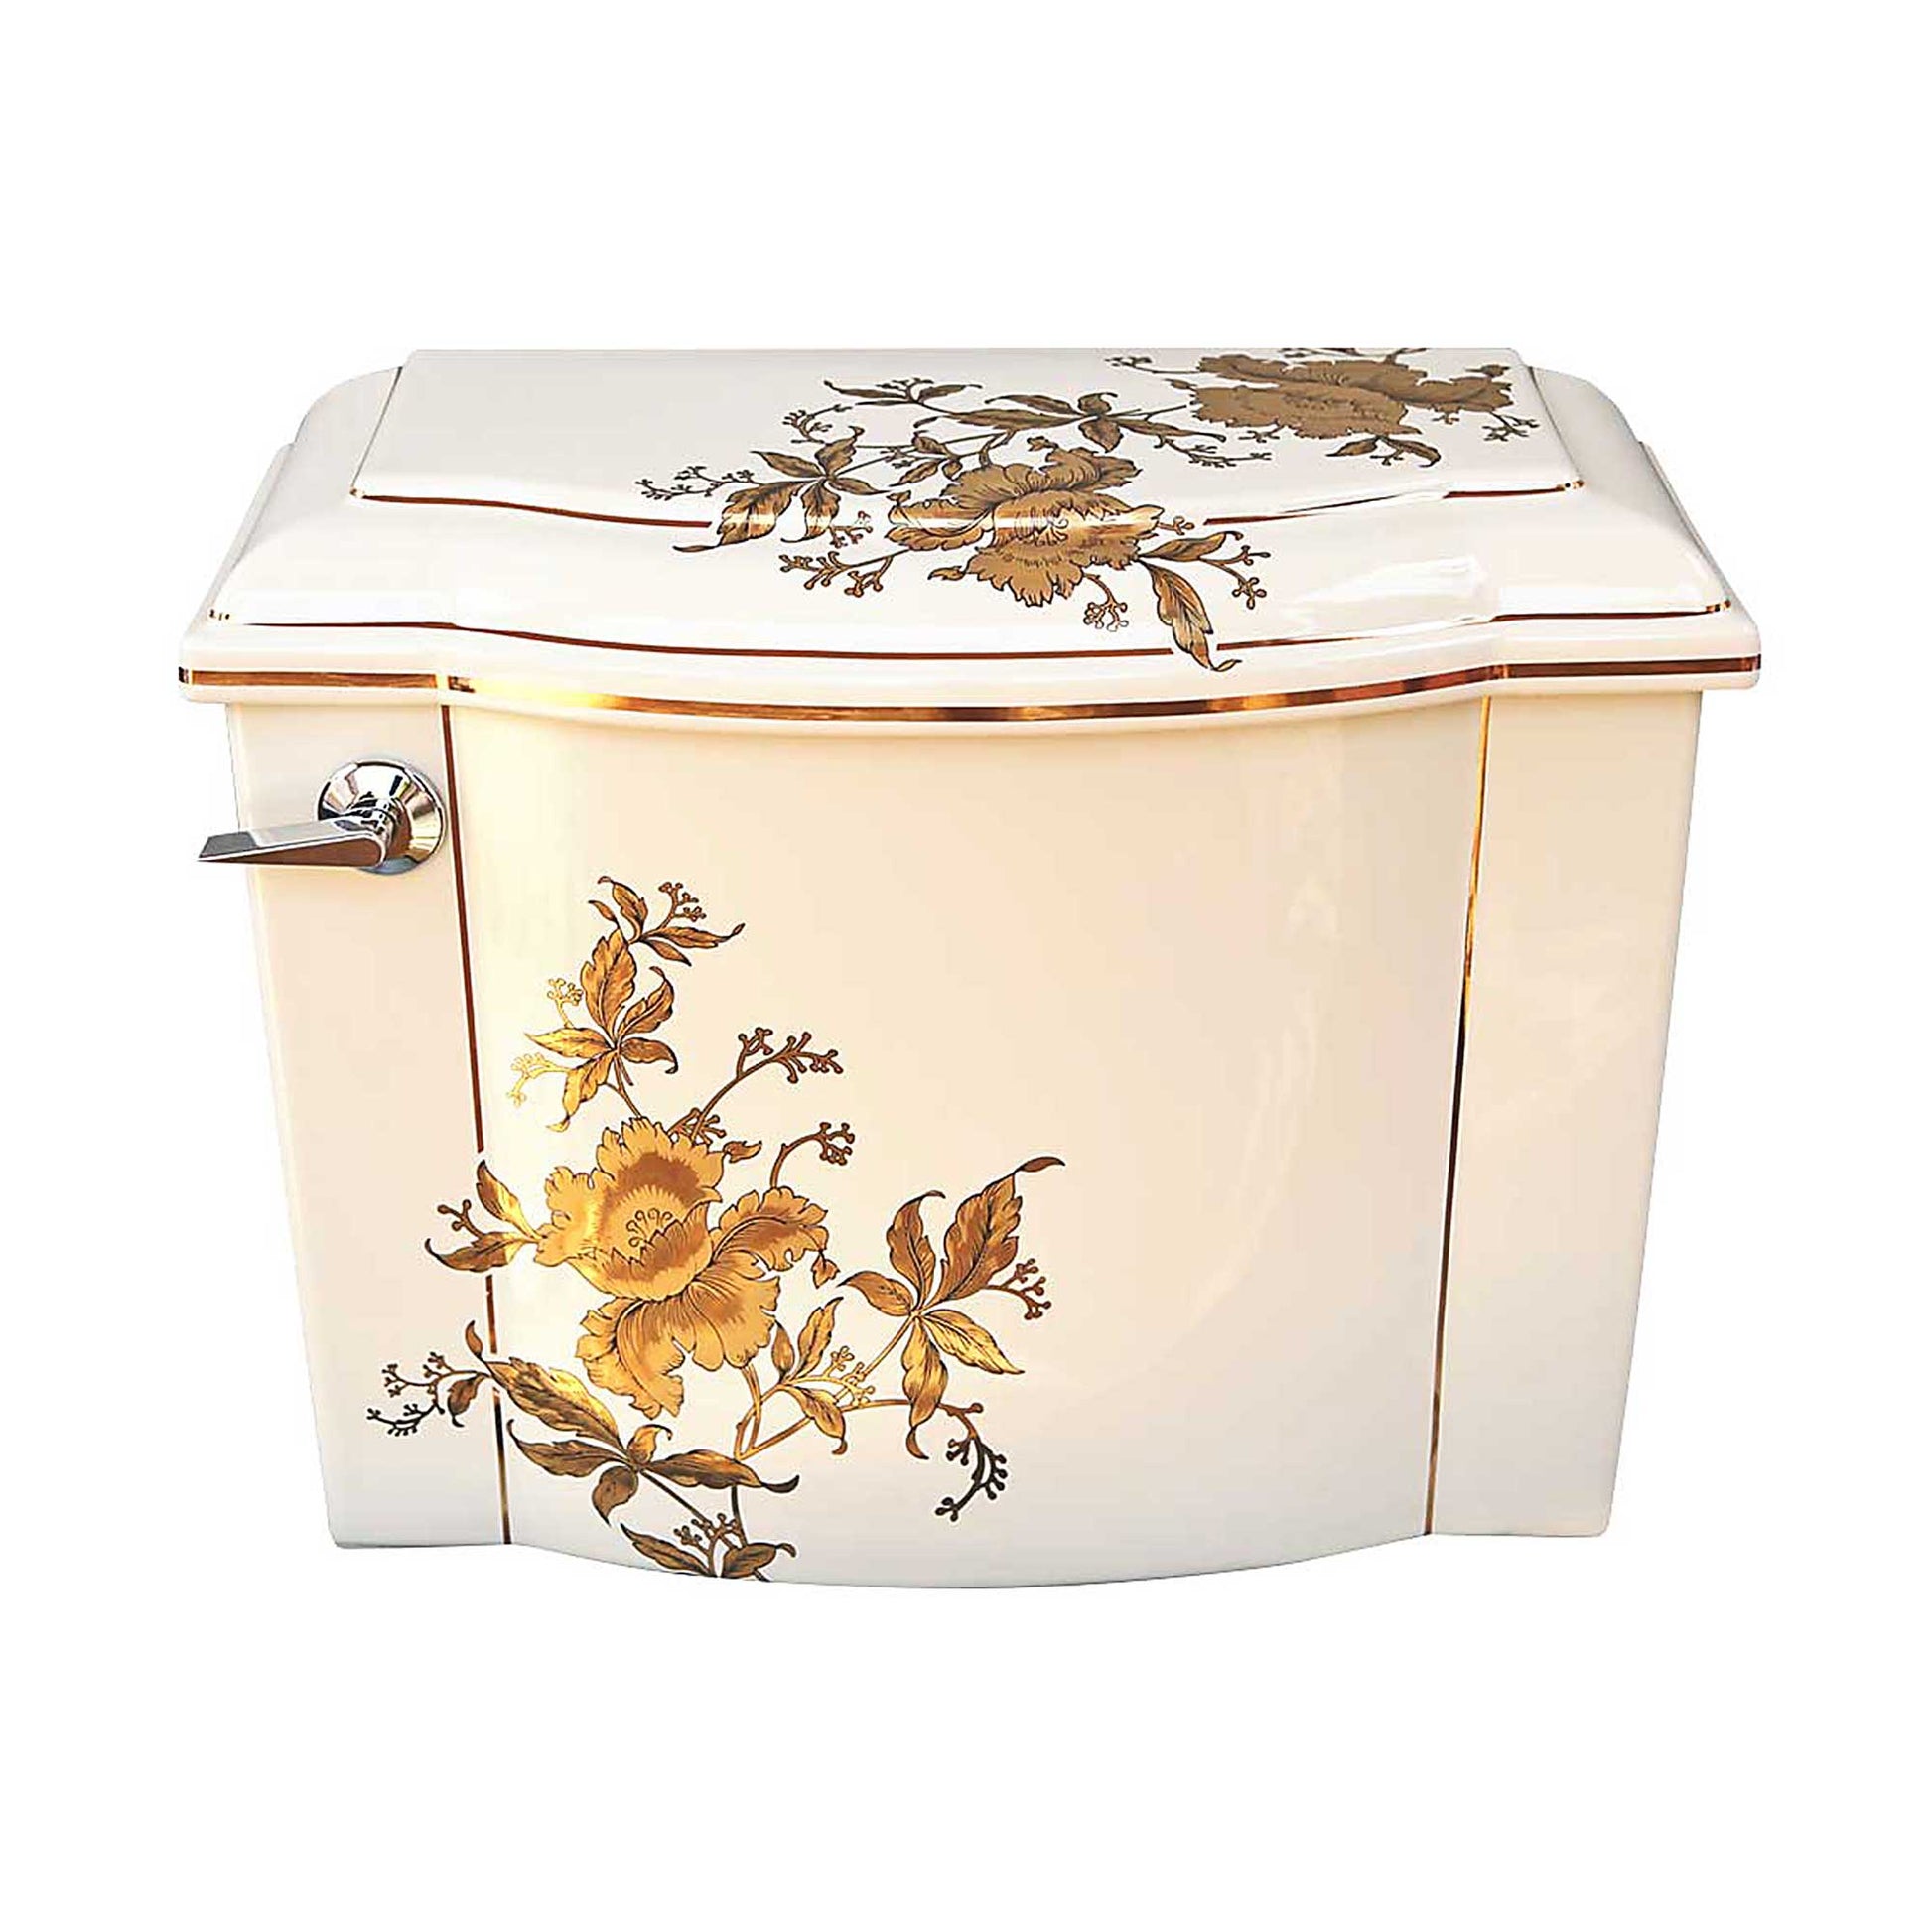 Kohler Devonshire toilet tank painted with gold orchids and bands